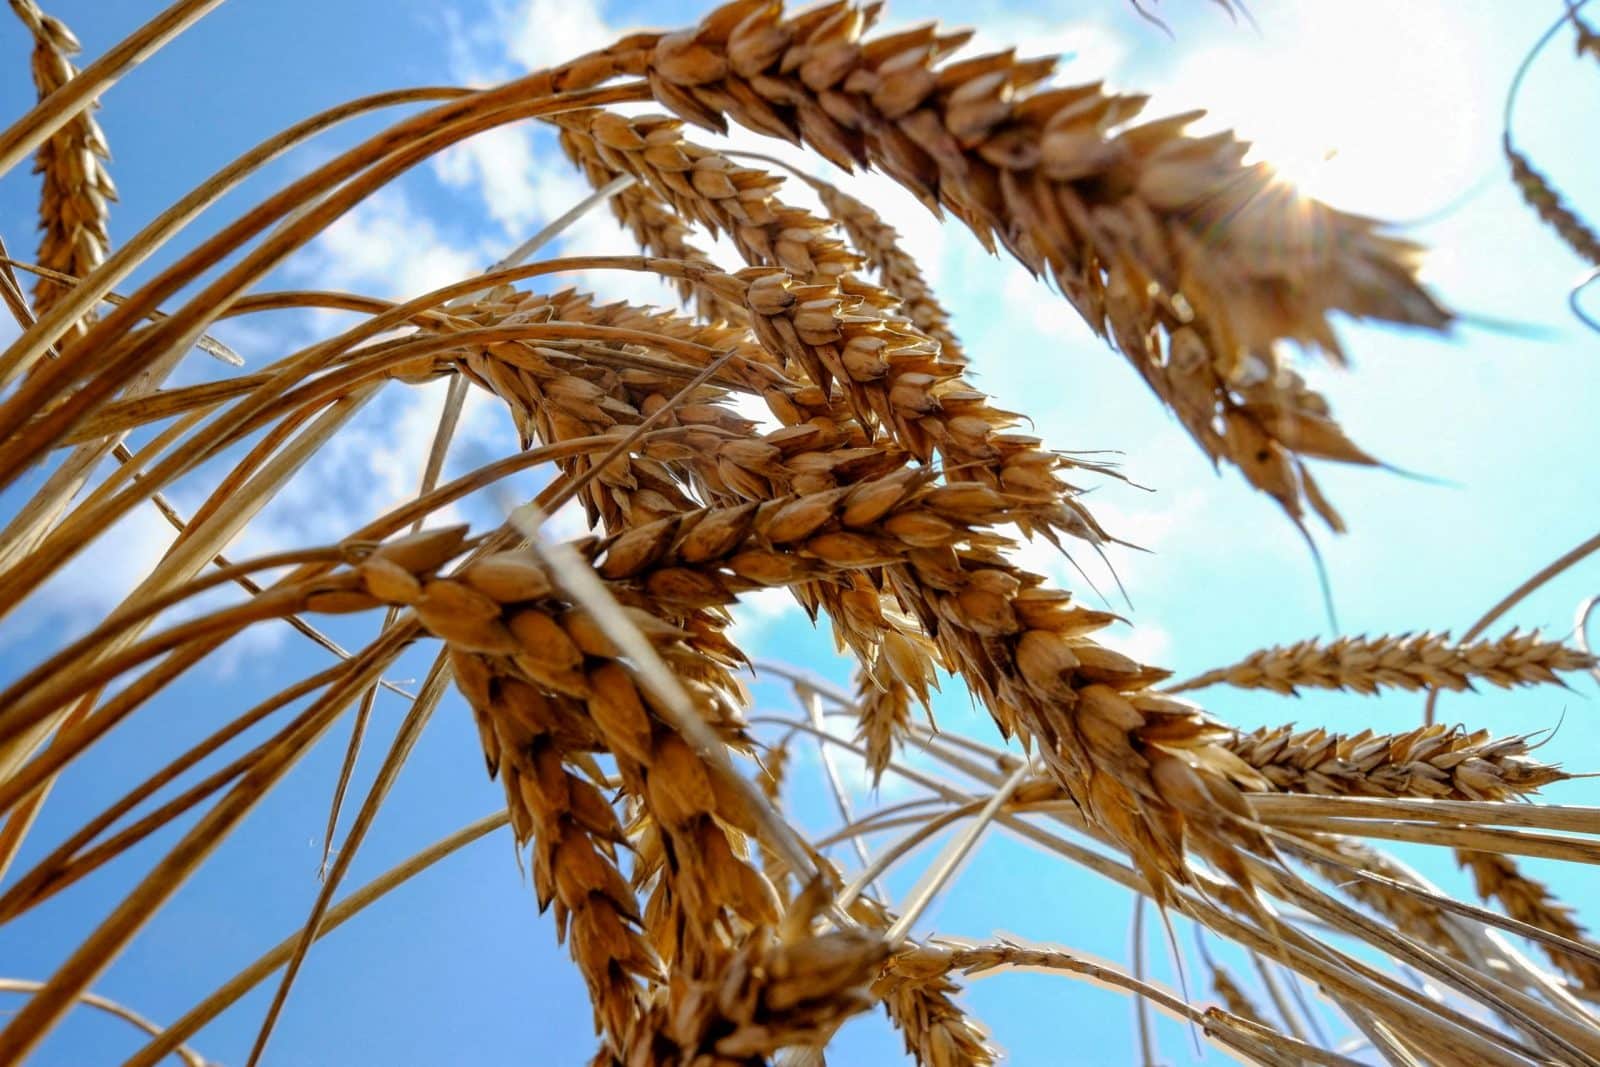 Russians tried to sell the stolen Ukrainian grain to Egypt